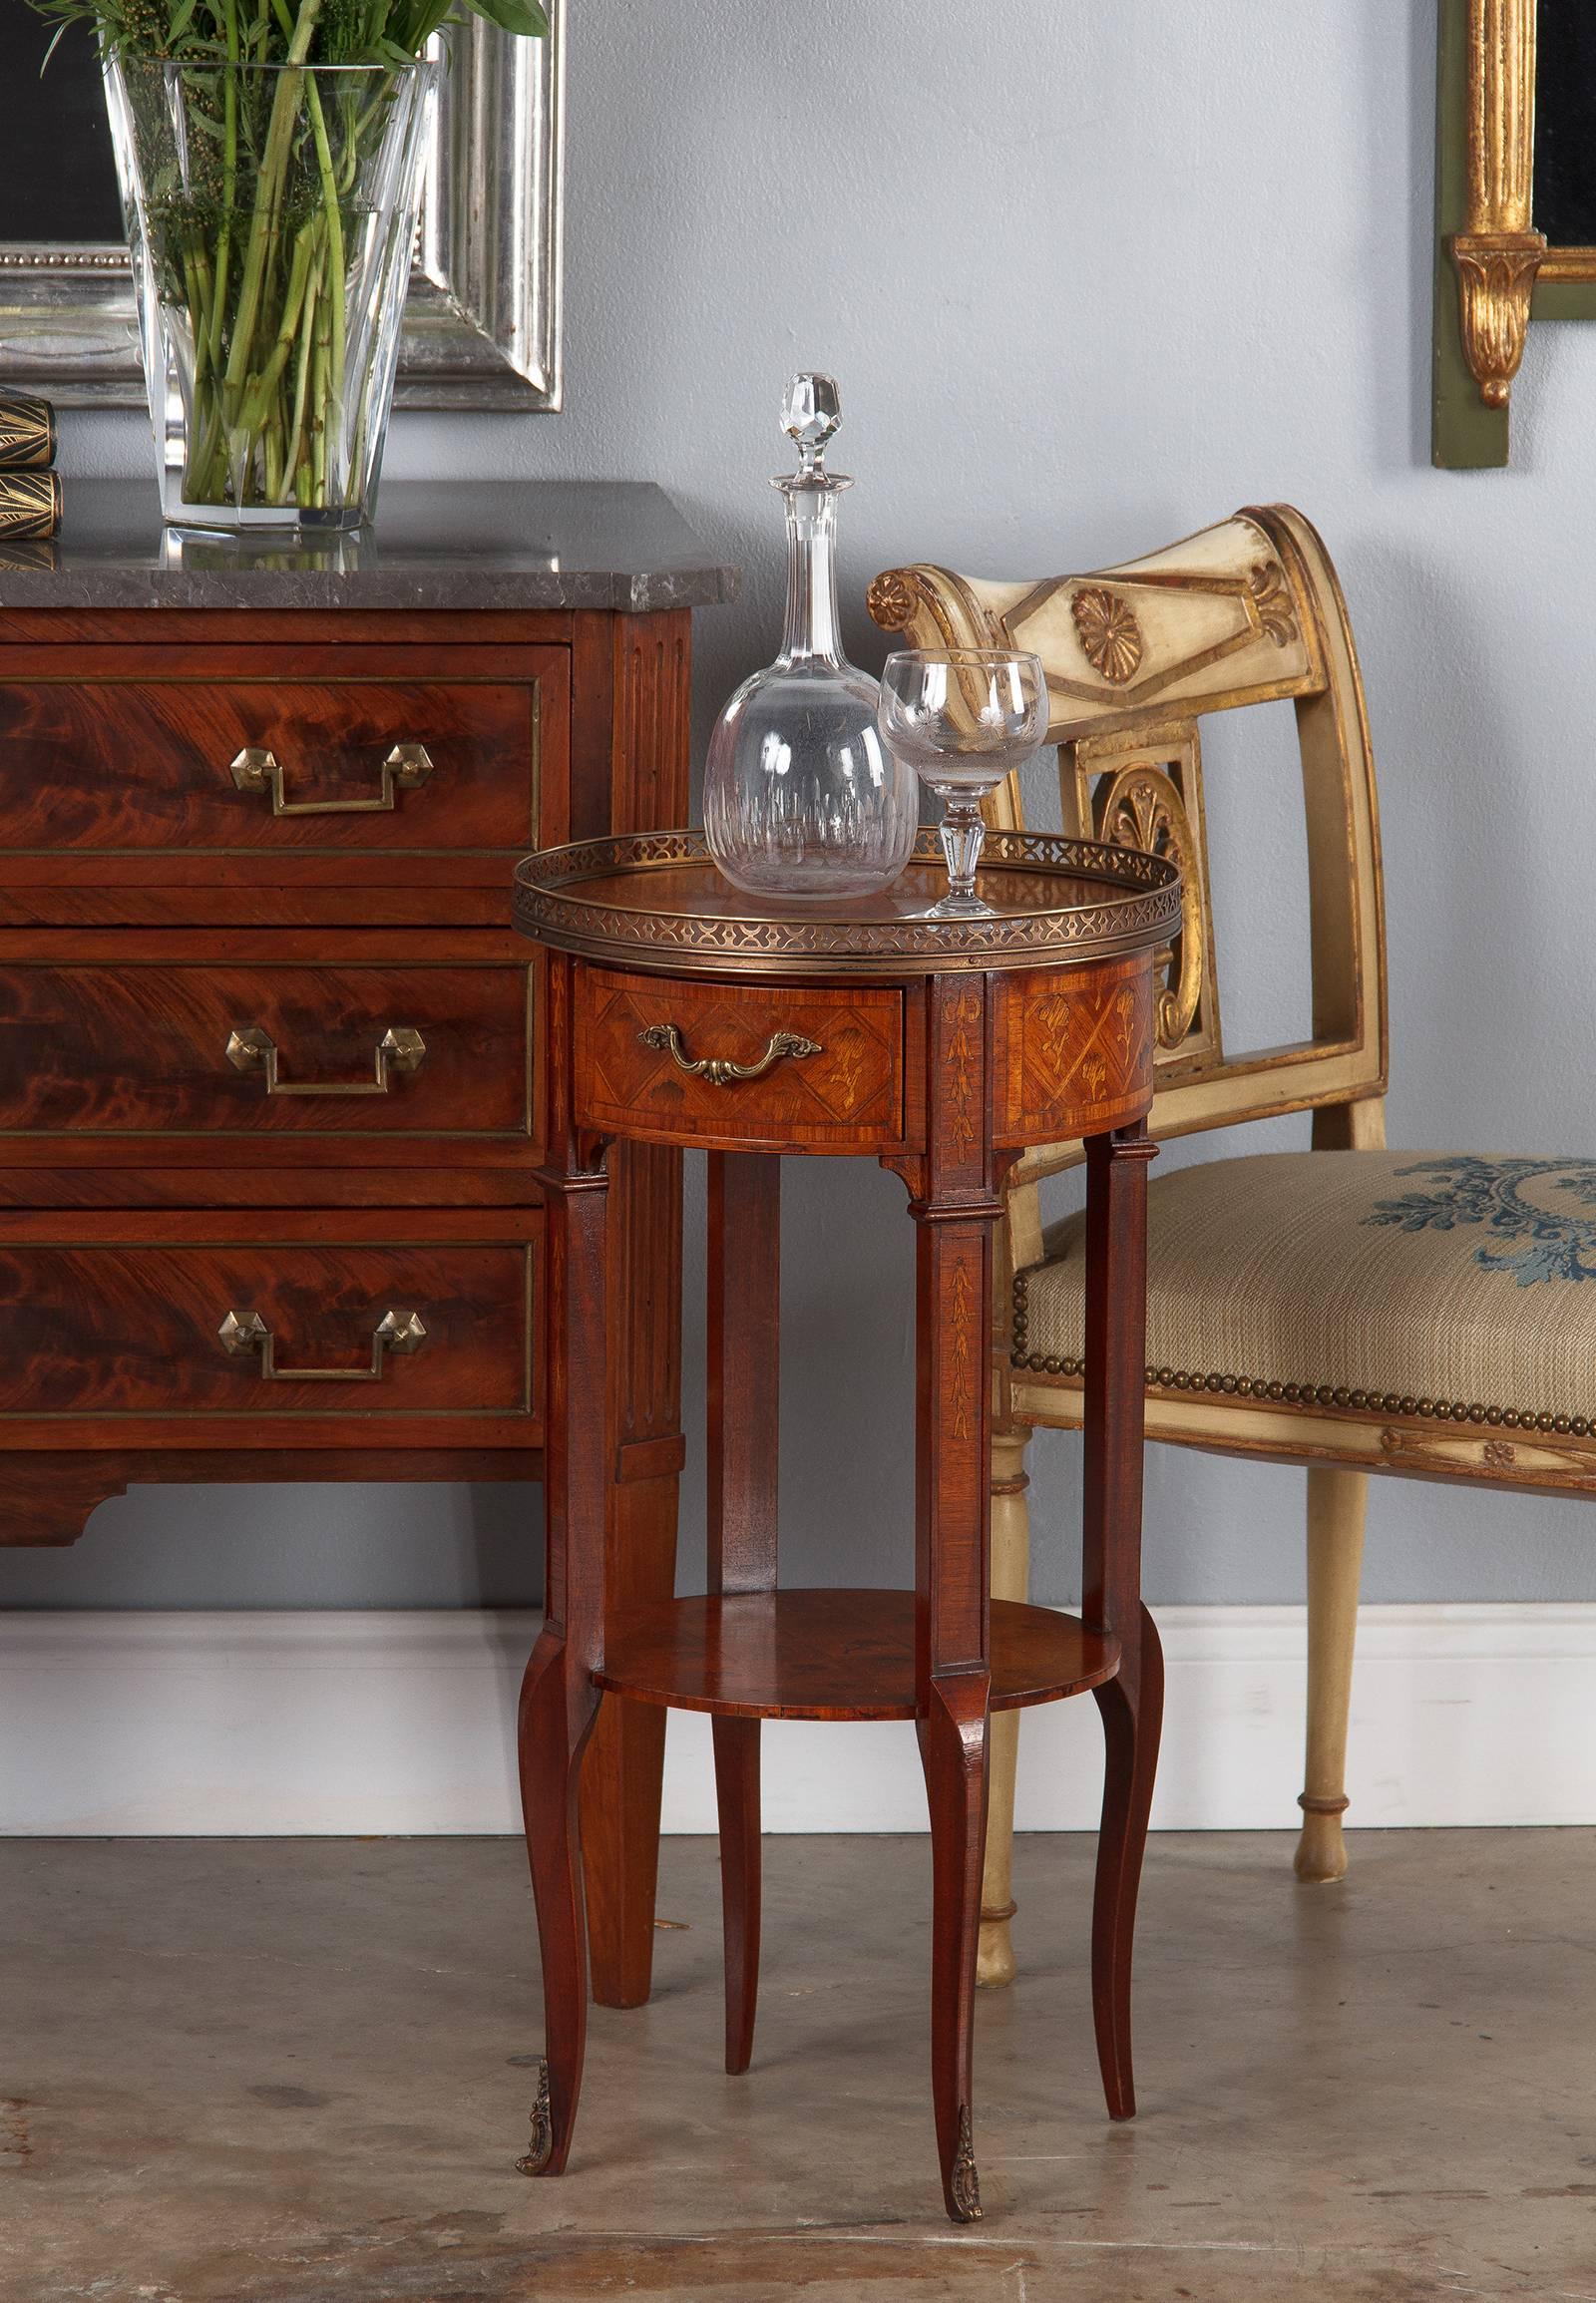 A masterfully executed marquetry side table in Louis XV/Louis XVI Transition style, from the late 1800s. The top, shelf and round sides have extensive marquetry, with a repeating floral design set into a checkerboard of alternately orientated wood